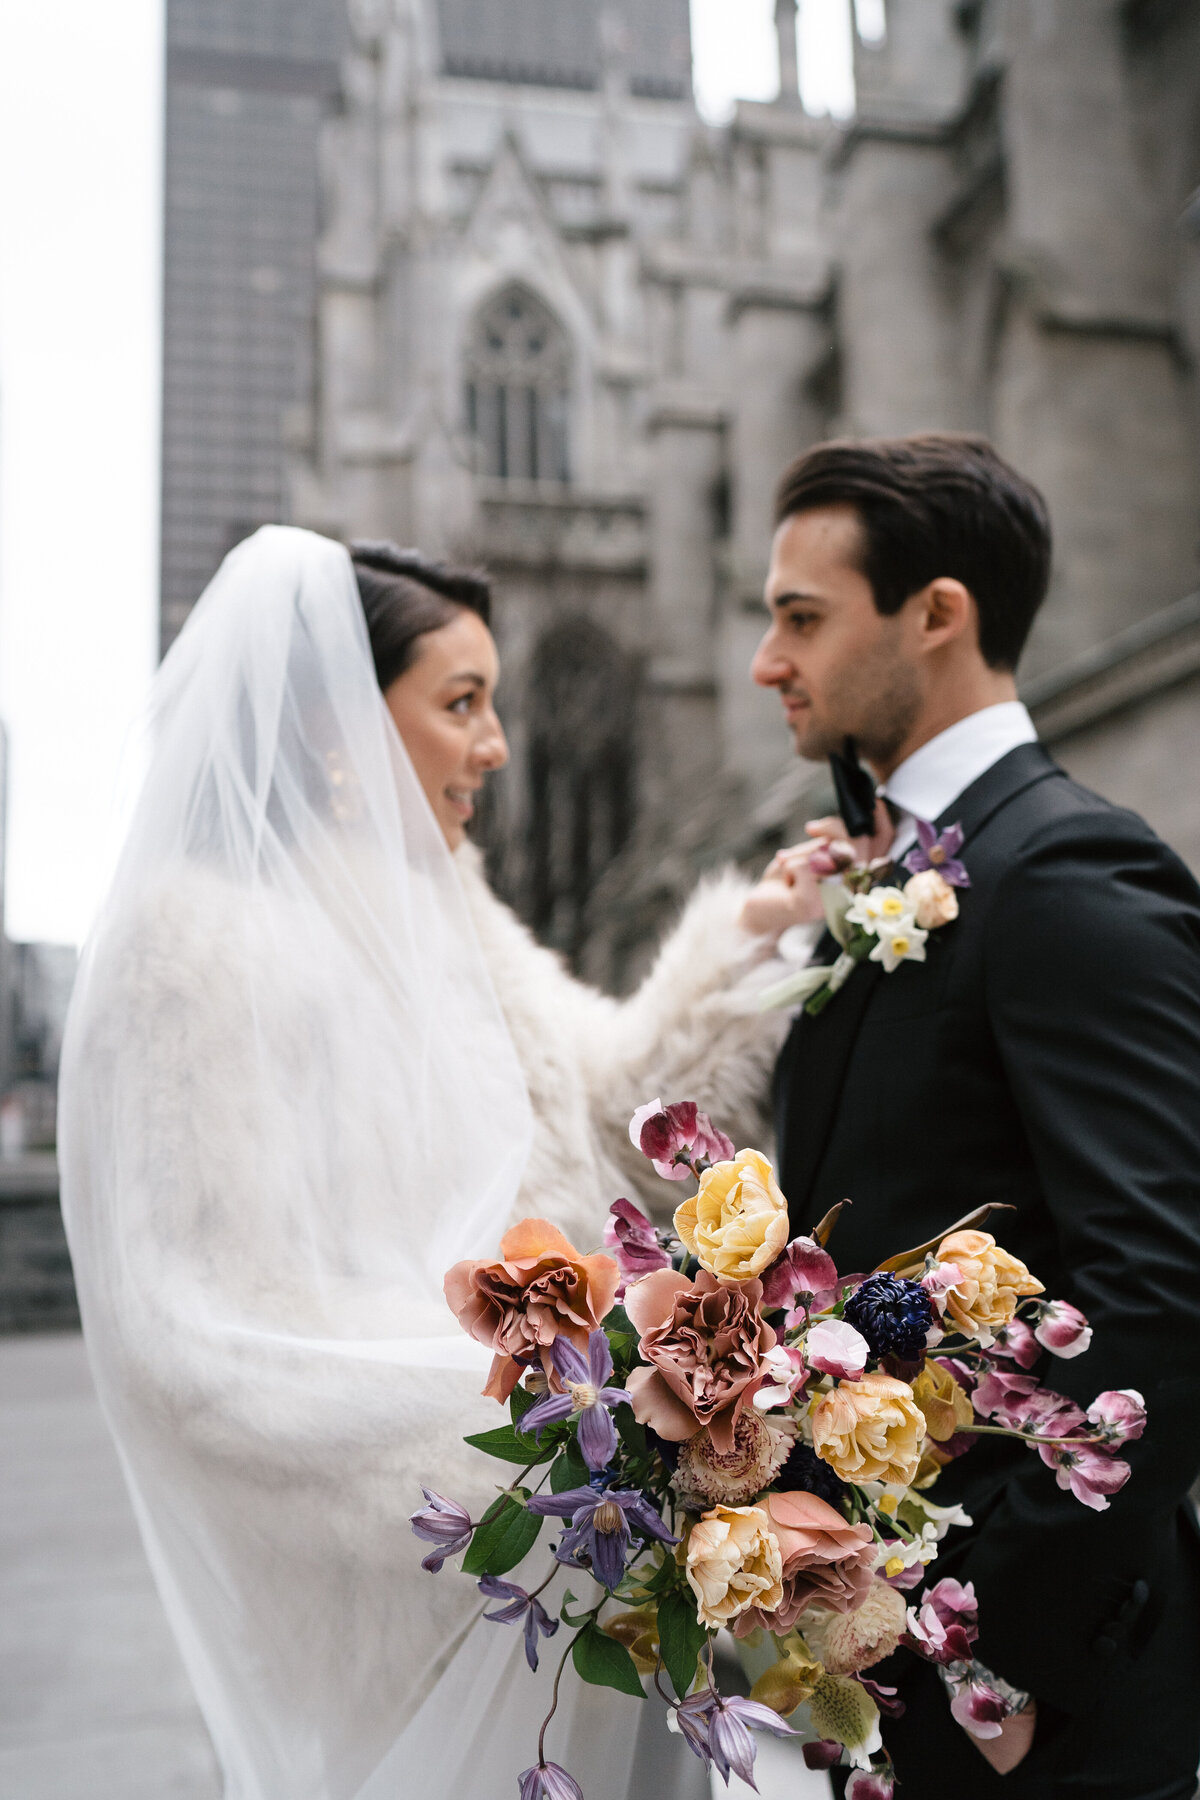 Rachel-Pourchier-Photography-Wedding-NYC-Palce46